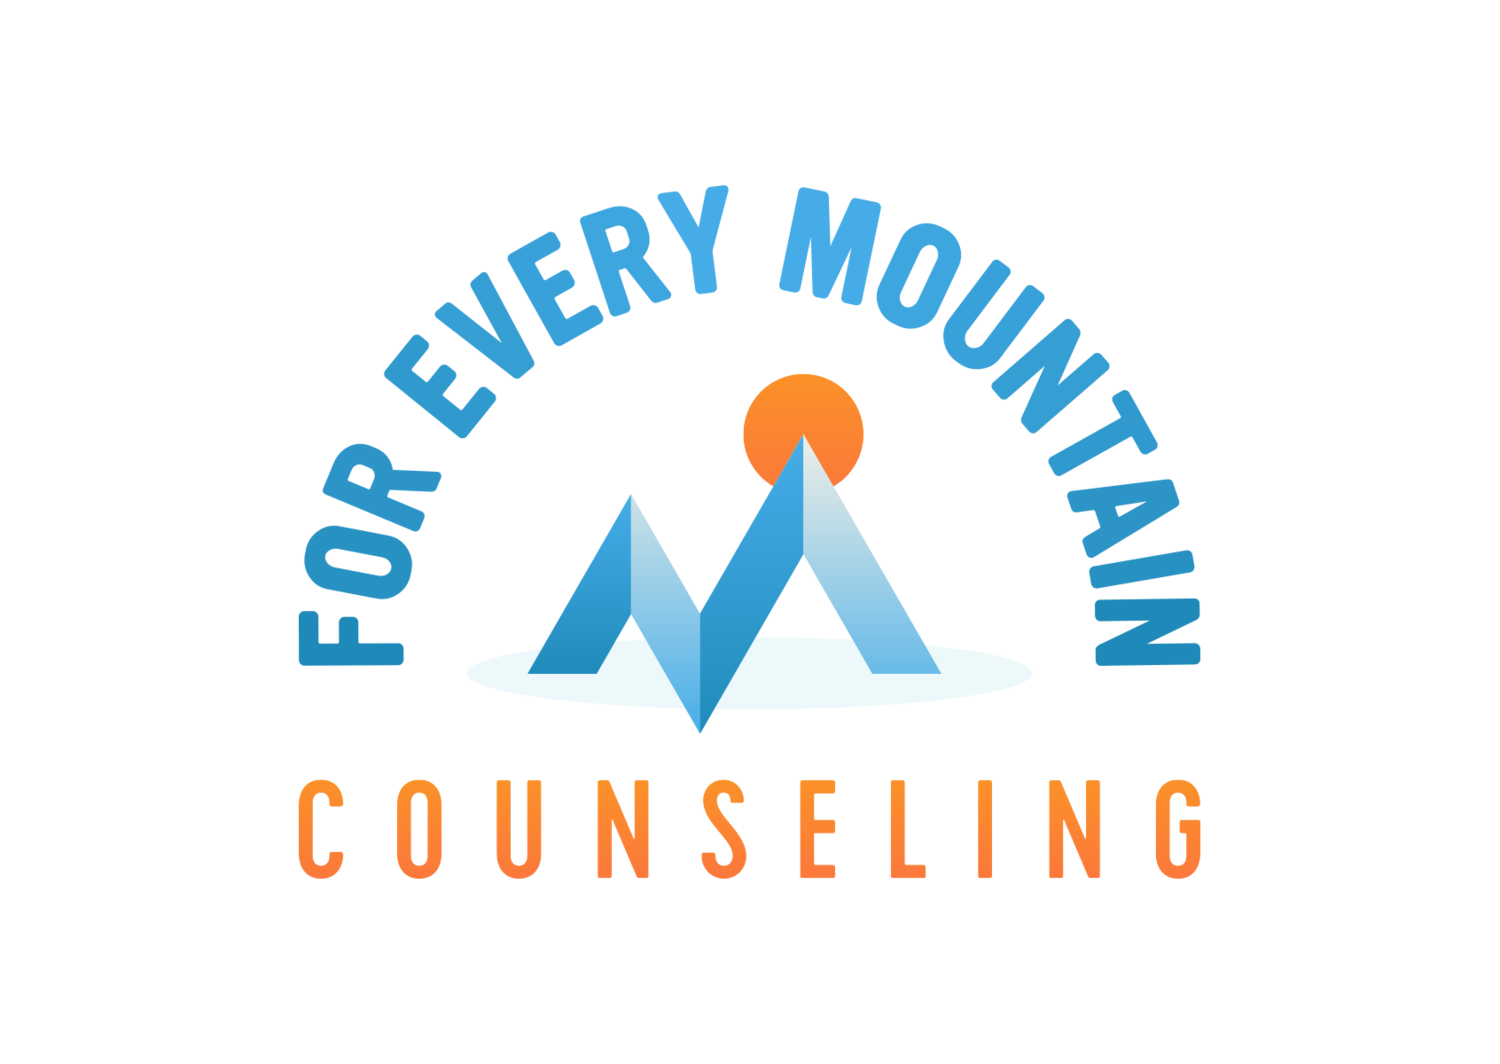 For Every Mountain